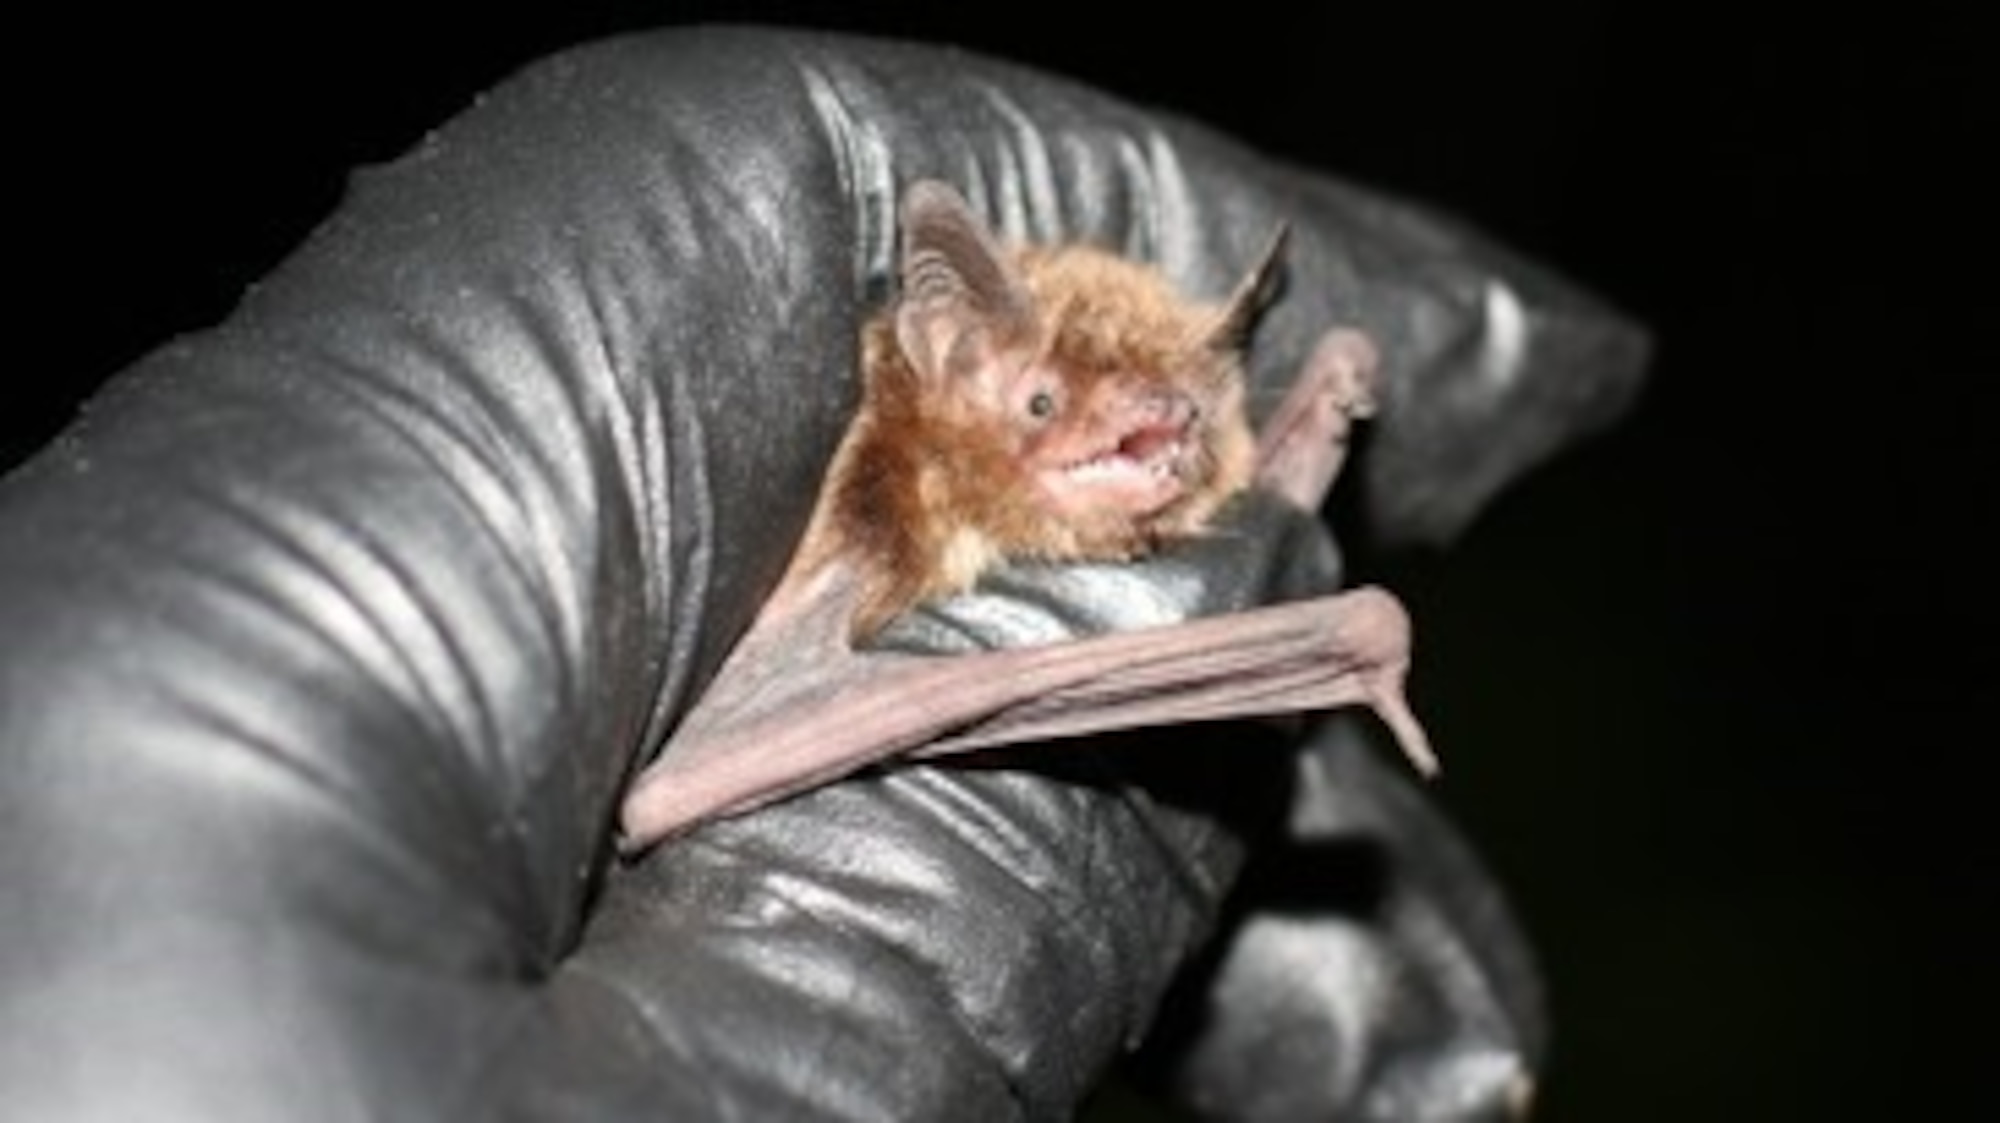 An Indiana bat found at Wright-Patterson during a mist net survey, by the U.S. Fish and Wildlife, June 2017. (Used with permission. U.S. Fish and Wildlife Service courtesy photo/Keith Lott)